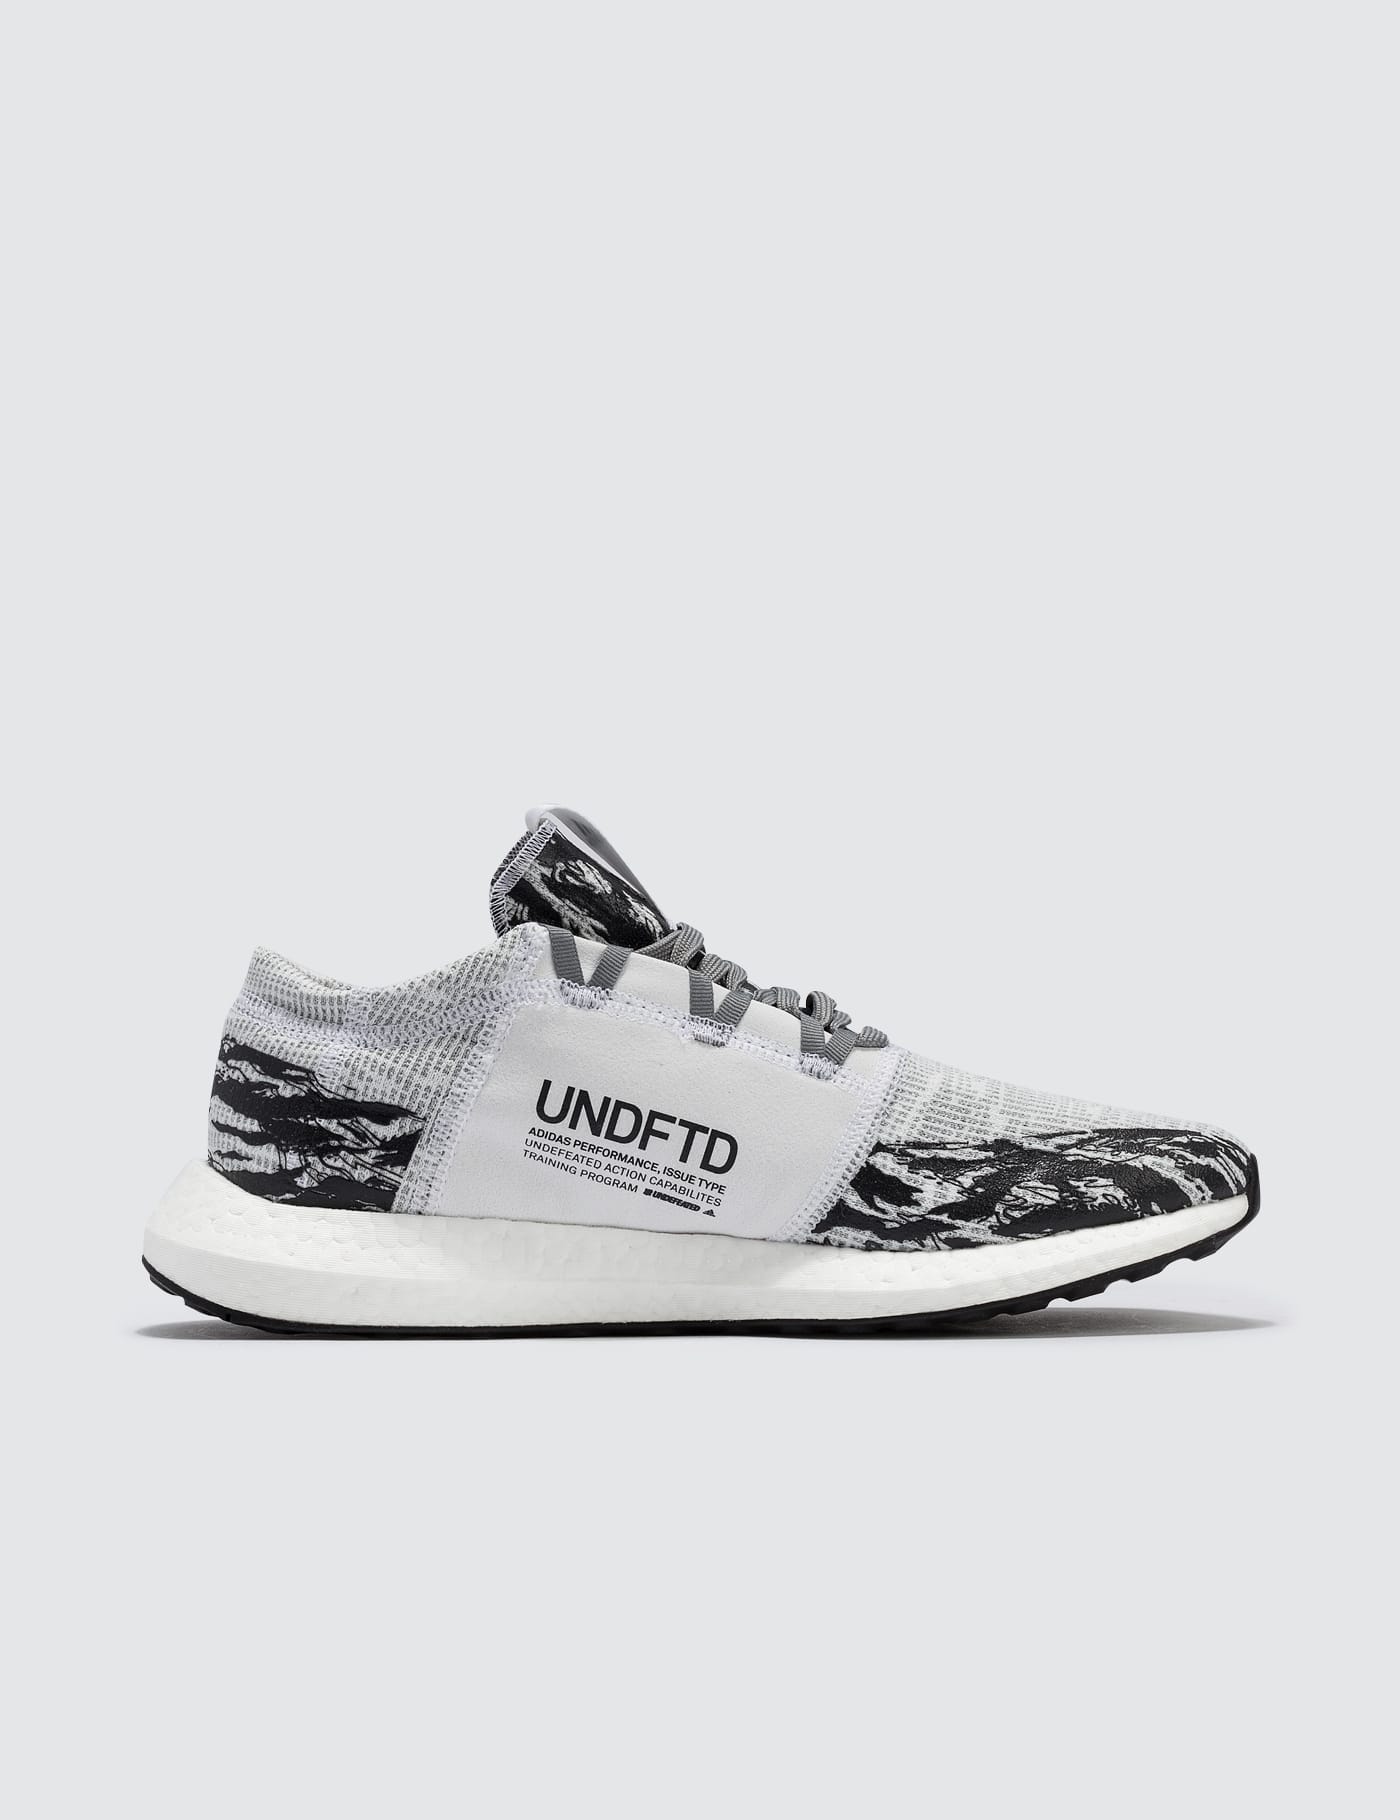 adidas x undefeated pureboost go shoes